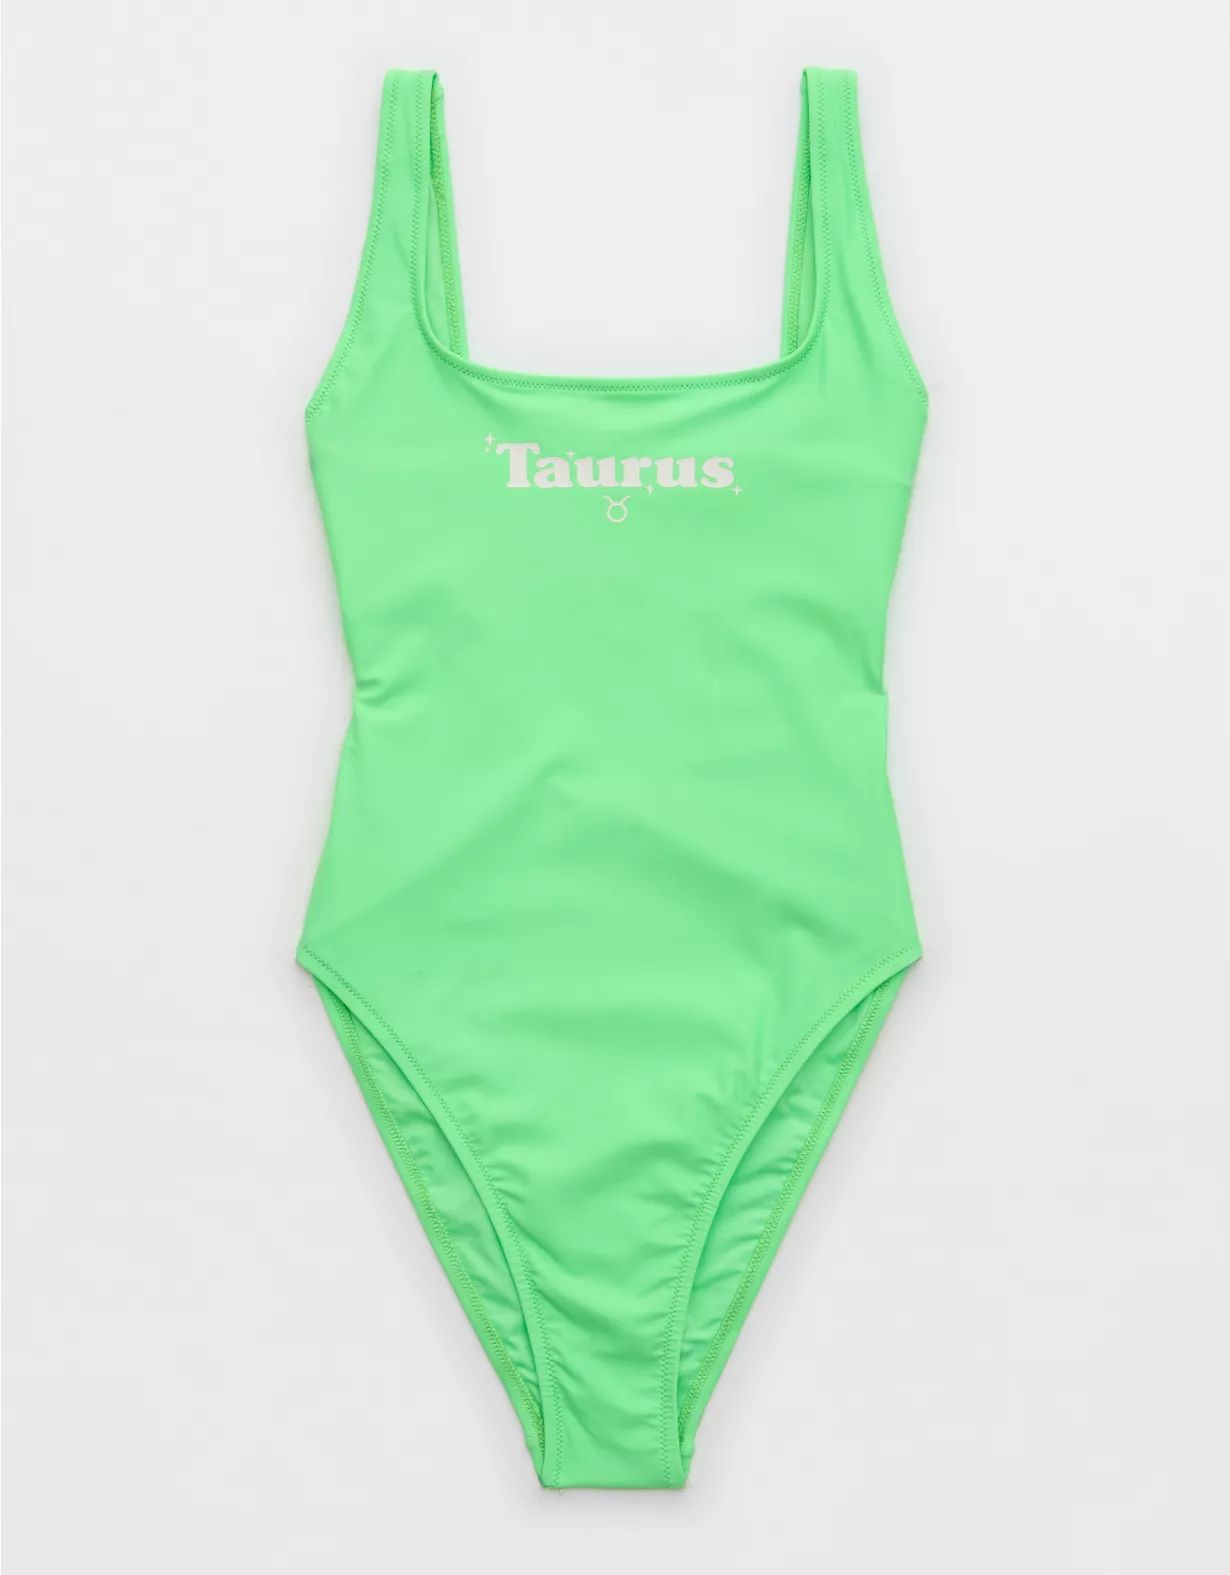 Aerie Astrology Babewatch One Piece Swimsuit | Aerie